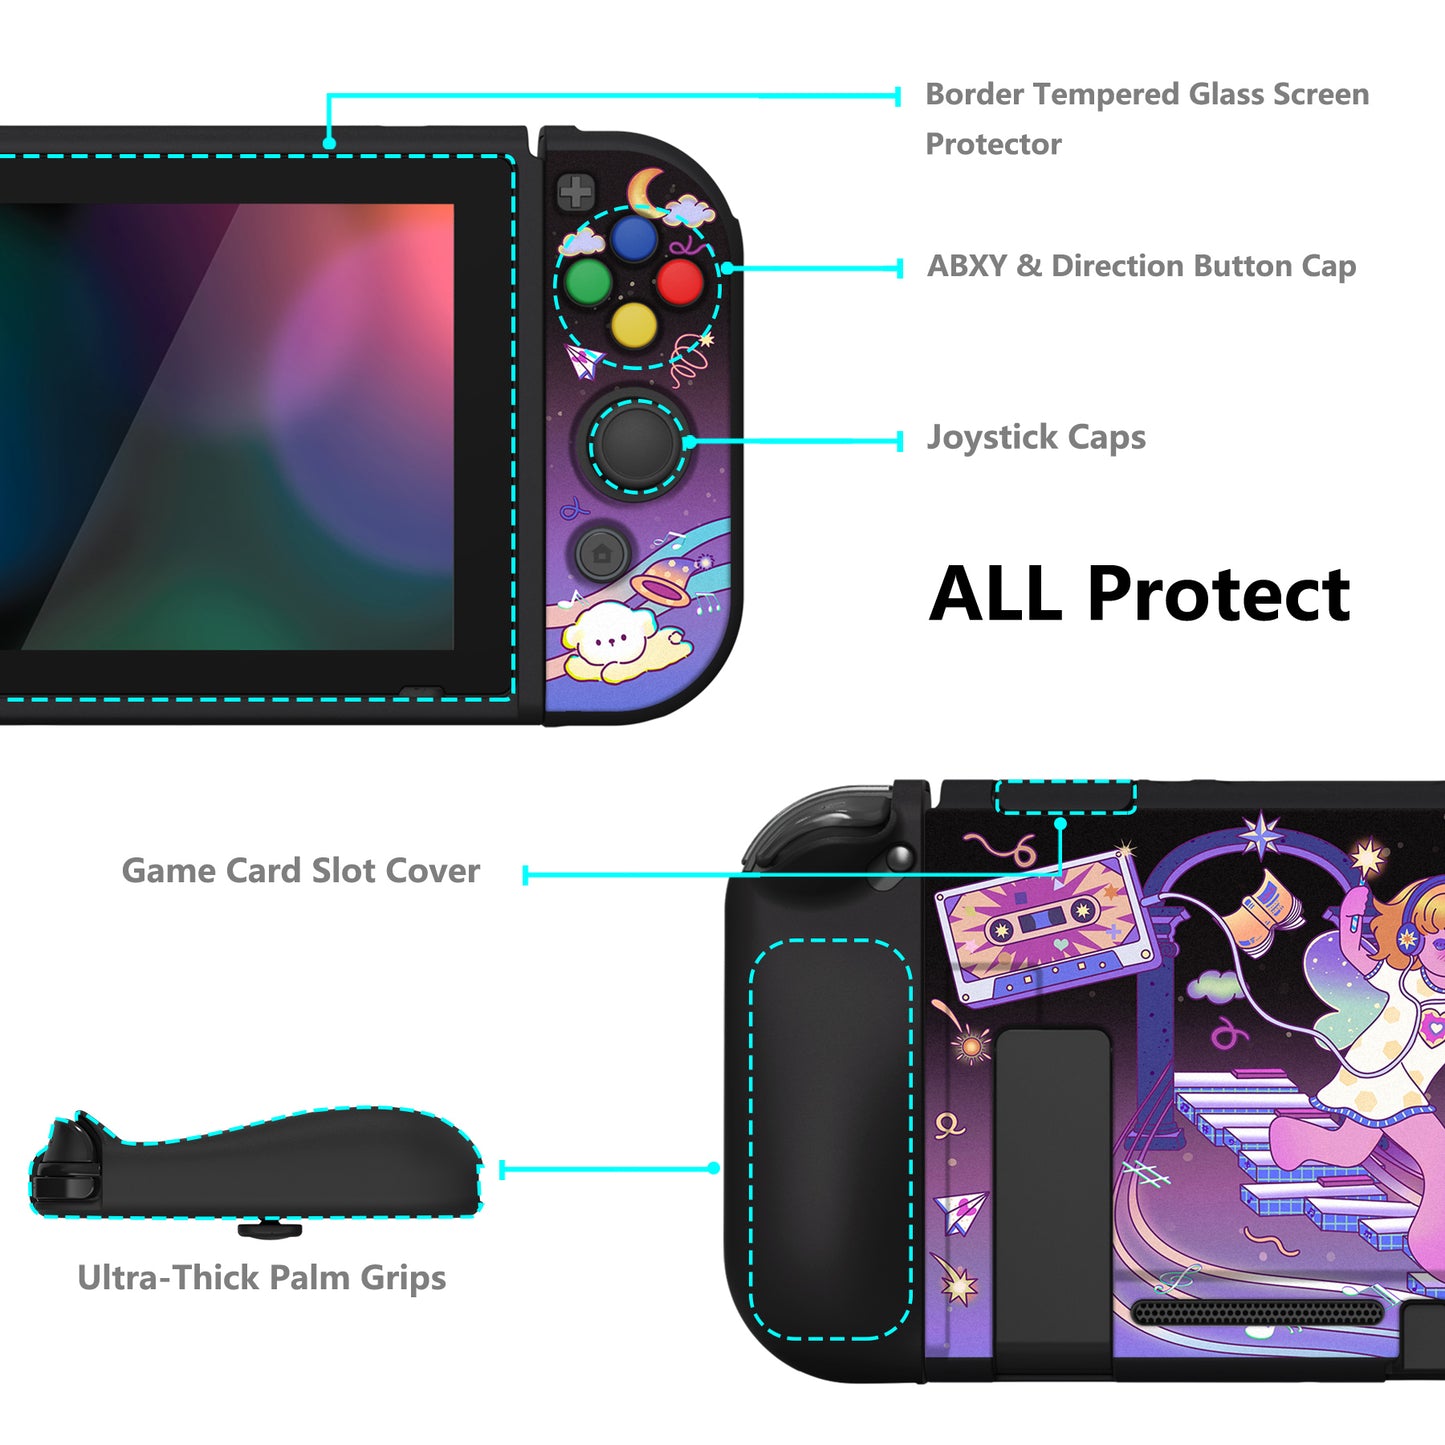 PlayVital ZealProtect Soft Protective Case for Nintendo Switch, Flexible Cover for Switch with Tempered Glass Screen Protector & Thumb Grips & ABXY Direction Button Caps - Dancing Notes - RNSYV6049 playvital